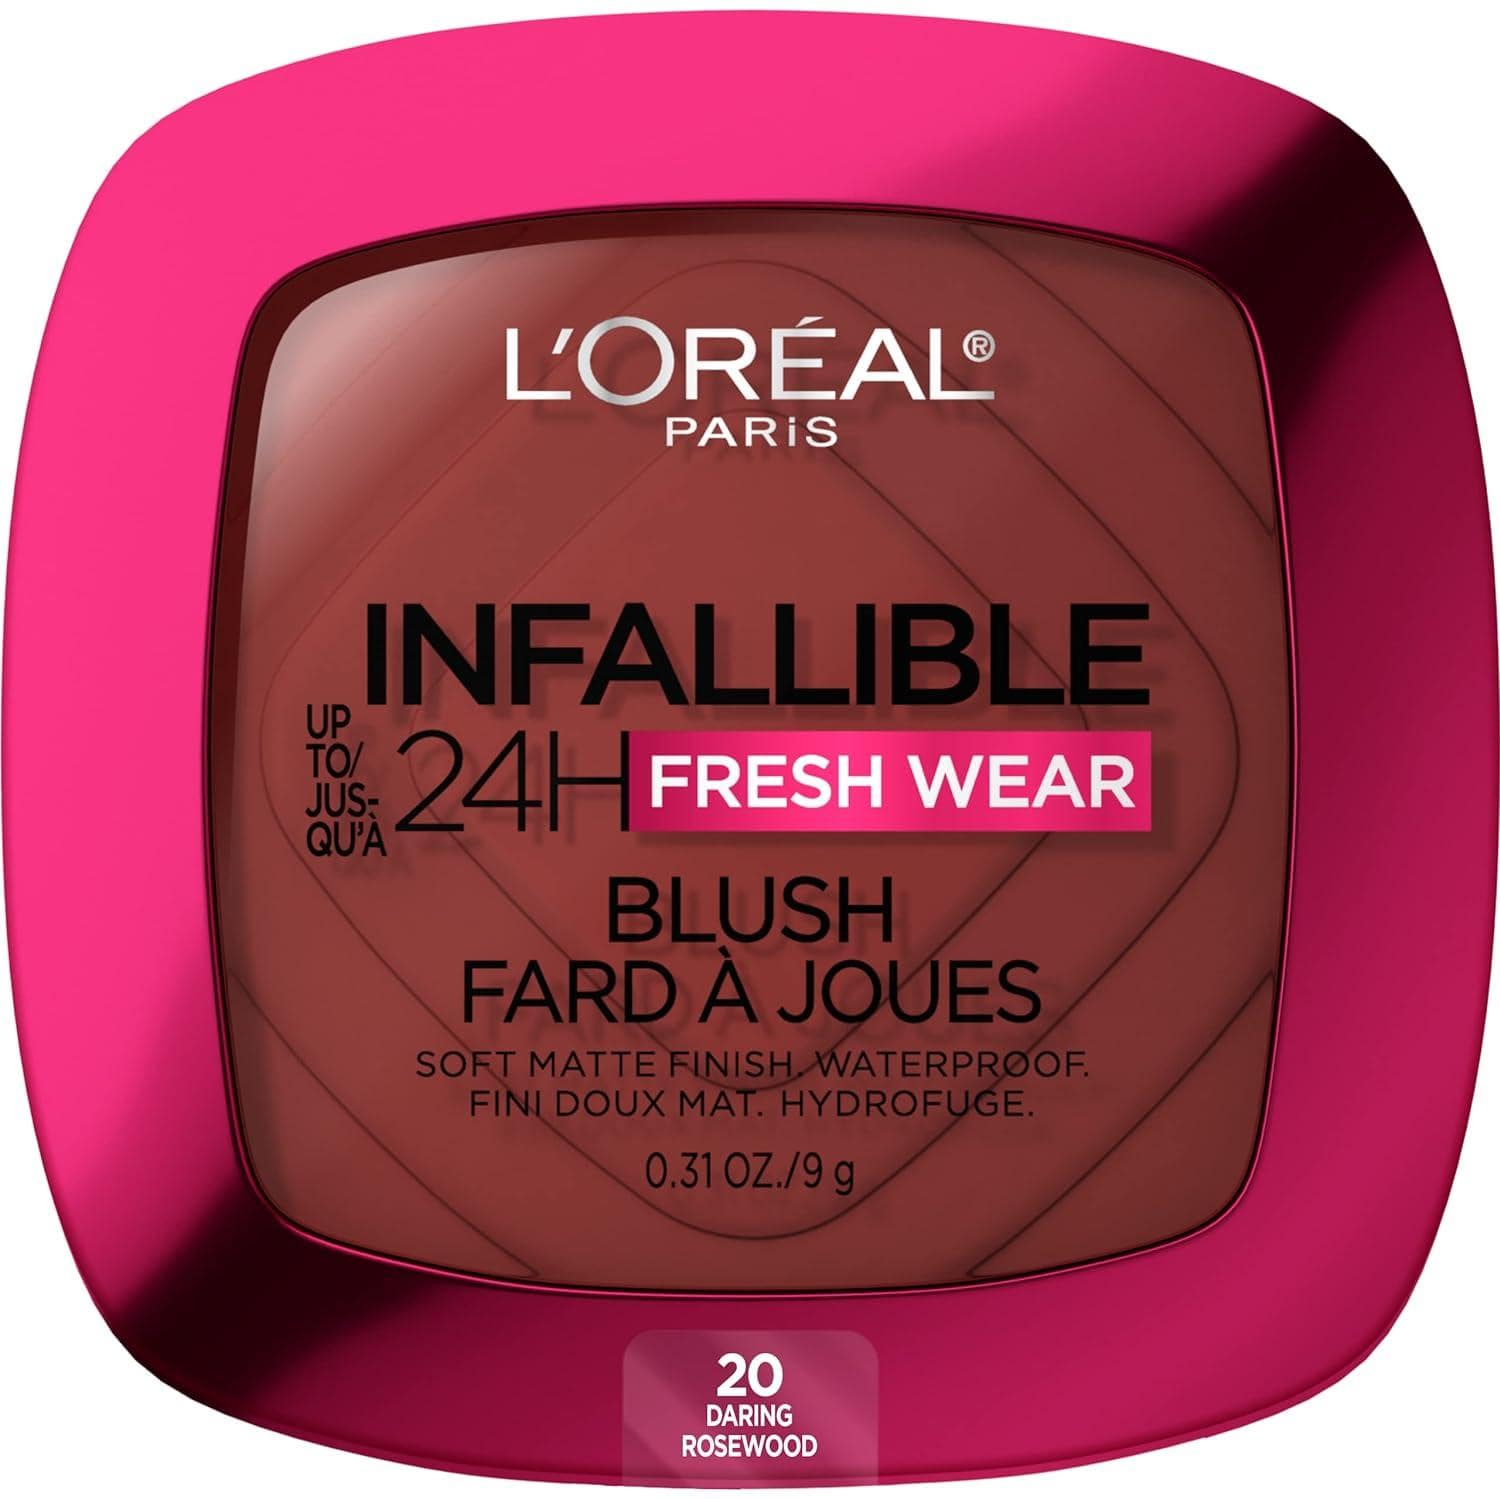 L'Oréal Infallible 24H Fresh Wear Soft Matte Blush brings a matte formula that won't age your skin, providing an elegant, transfer-proof, and water-resistant blush experience for a blissful touch.